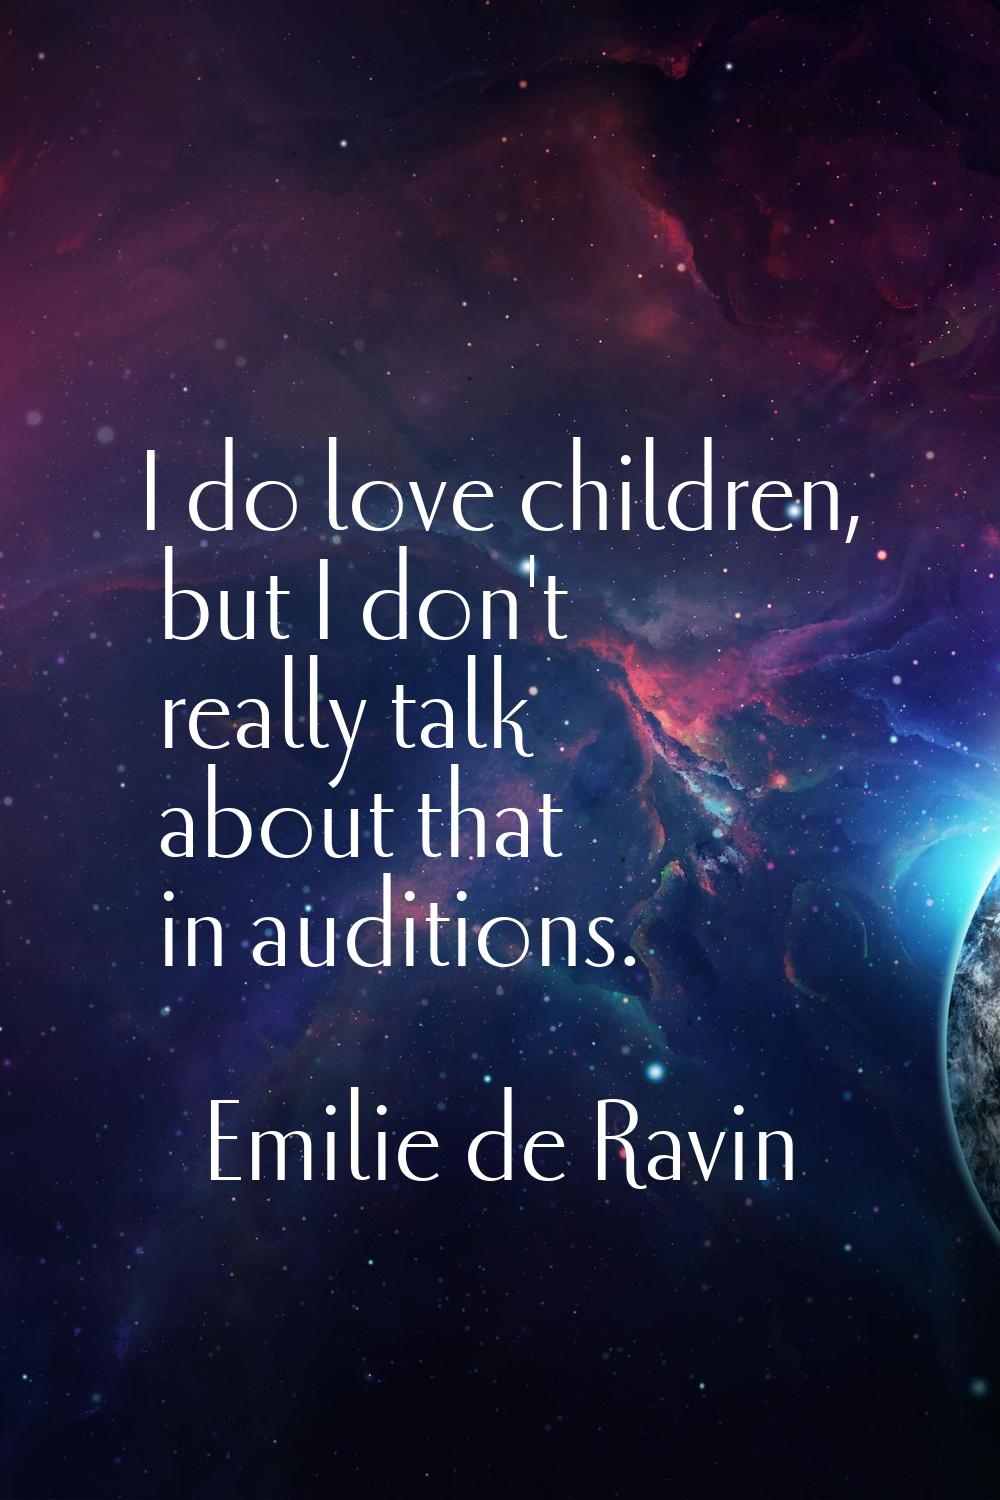 I do love children, but I don't really talk about that in auditions.